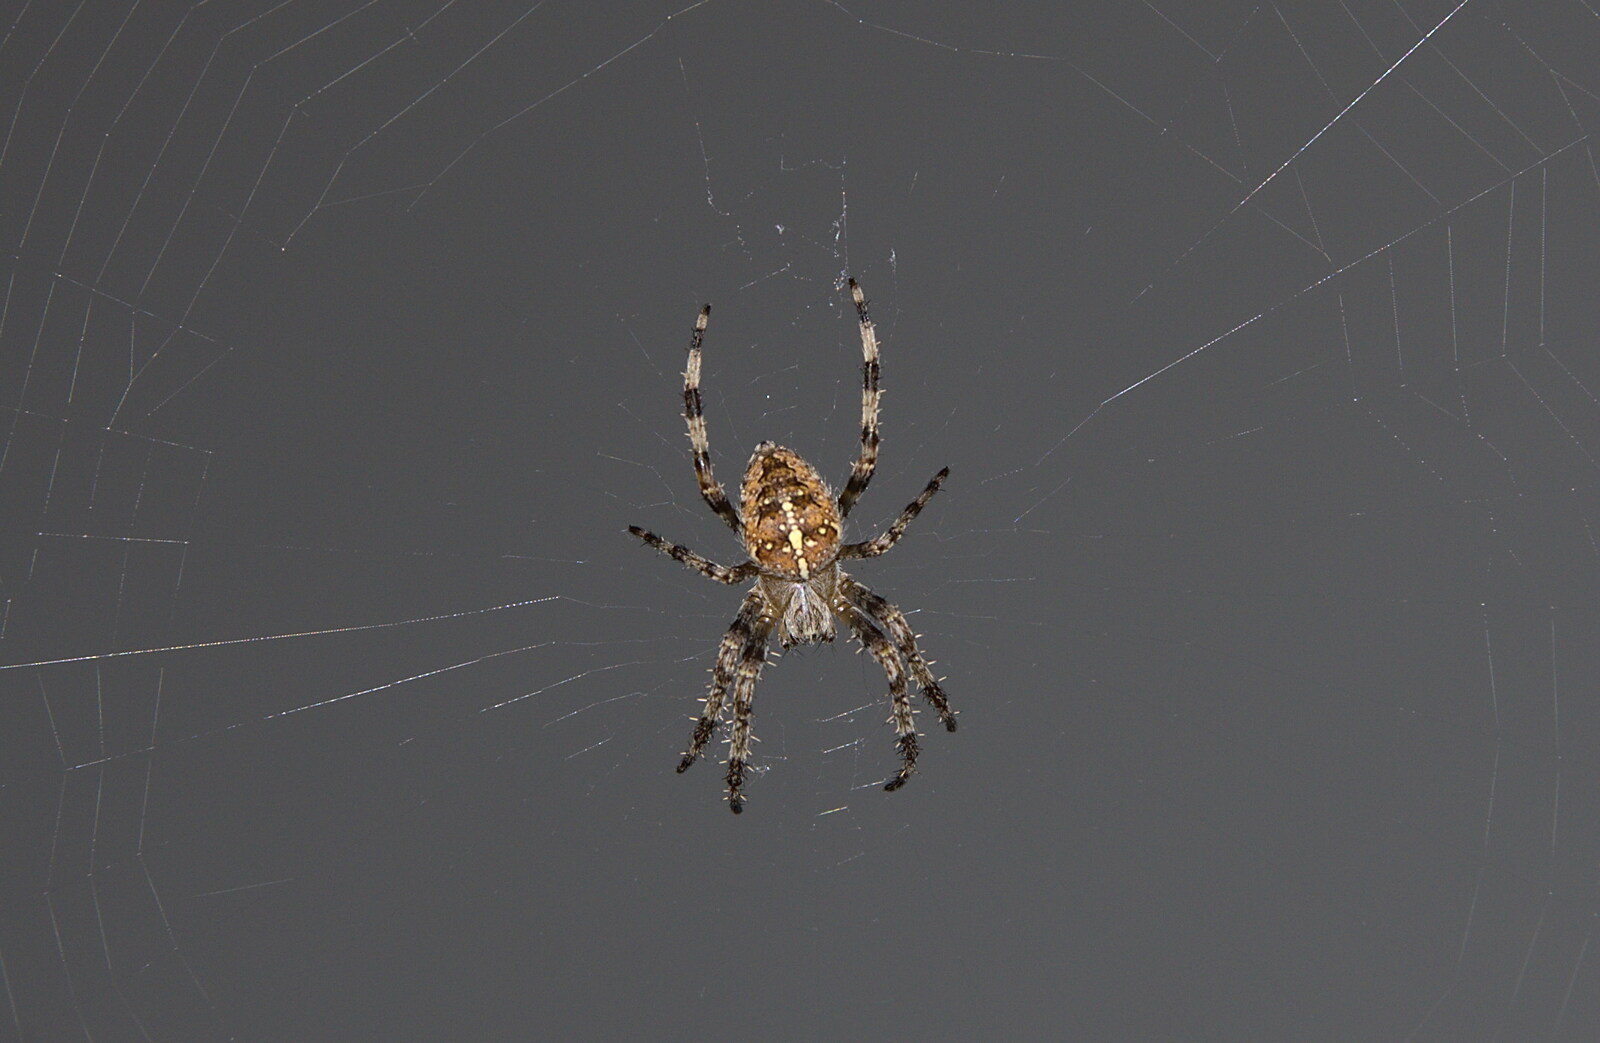 A cool stripey-legged spider from New Railway and a Trip to Ikea, Ipswich and Thurrock - 19th September 2014